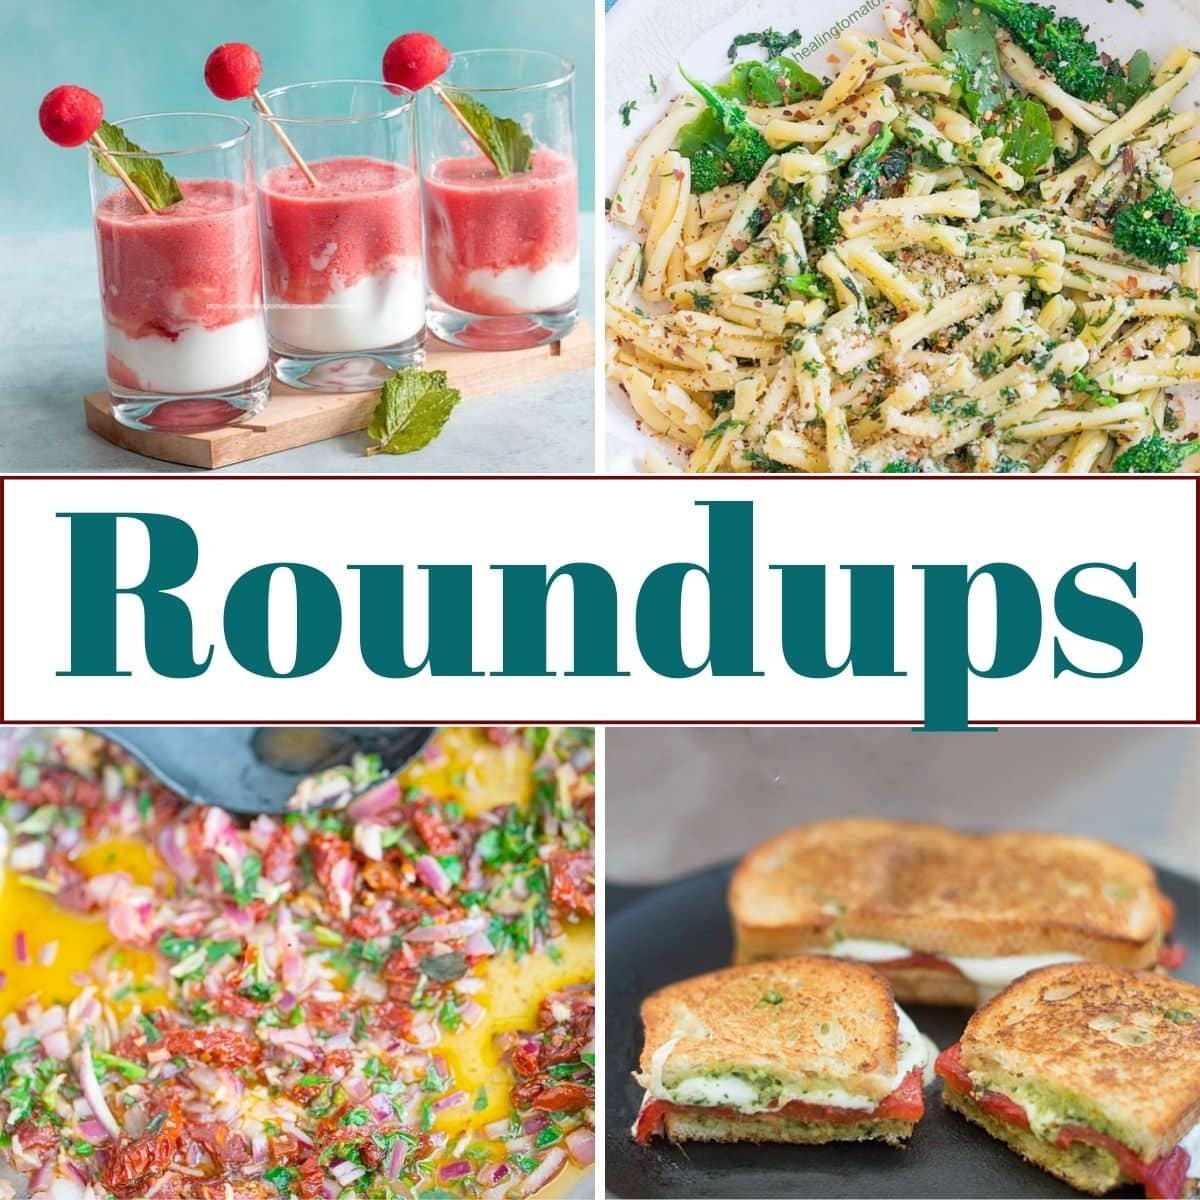 A collage of 4 images with the words "roundups" as the title